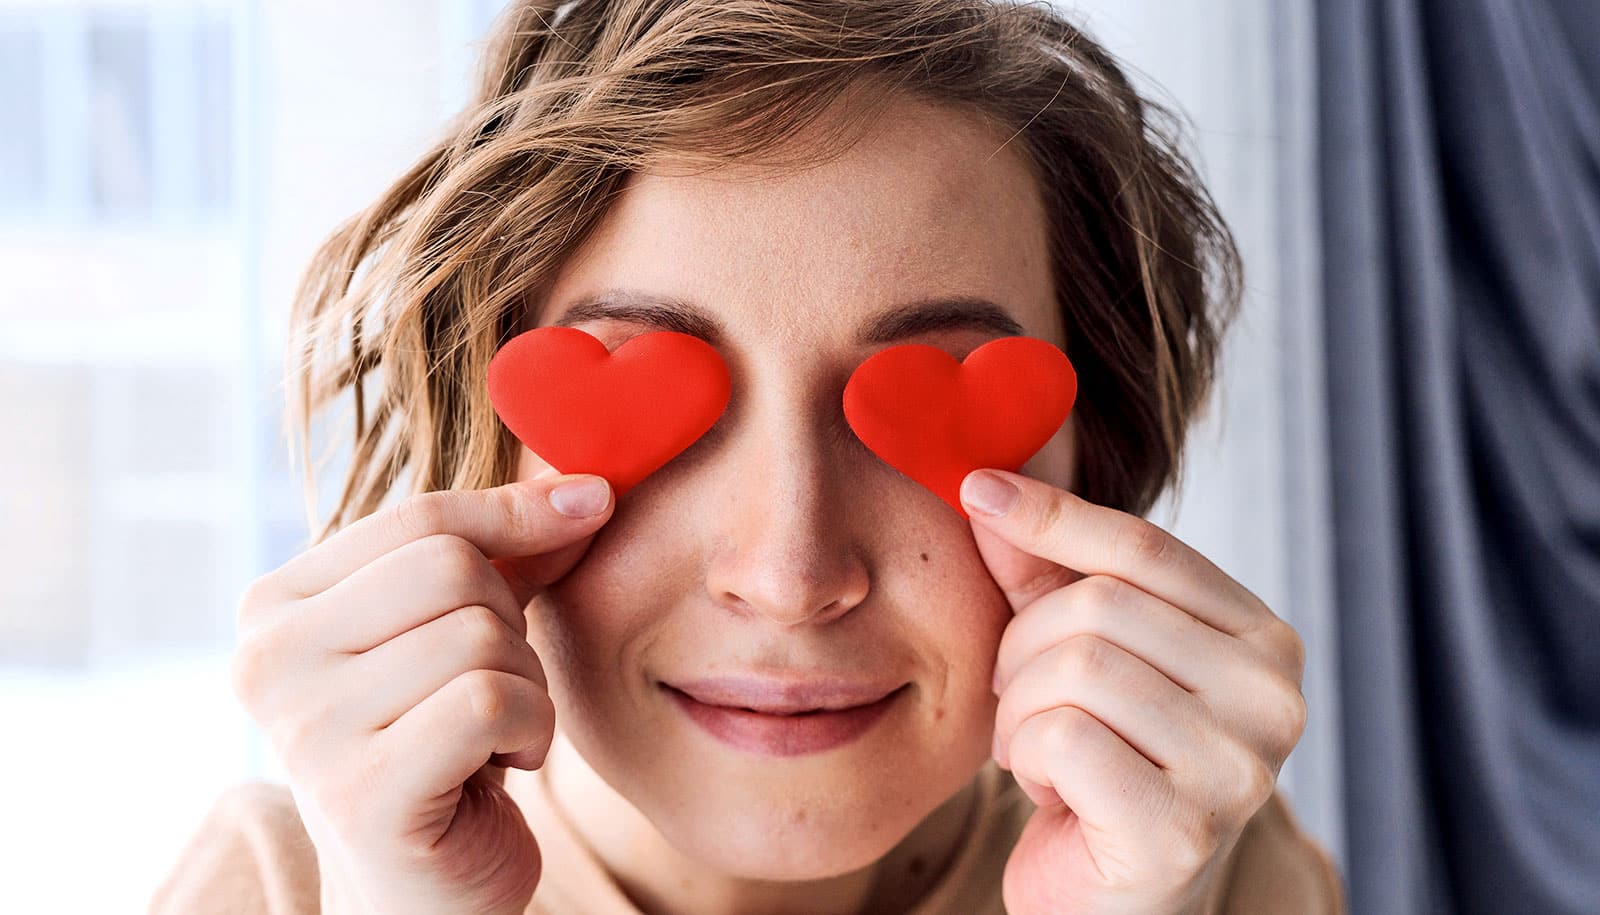 A woman holds heart-shaped pieces of paper over her eyes.